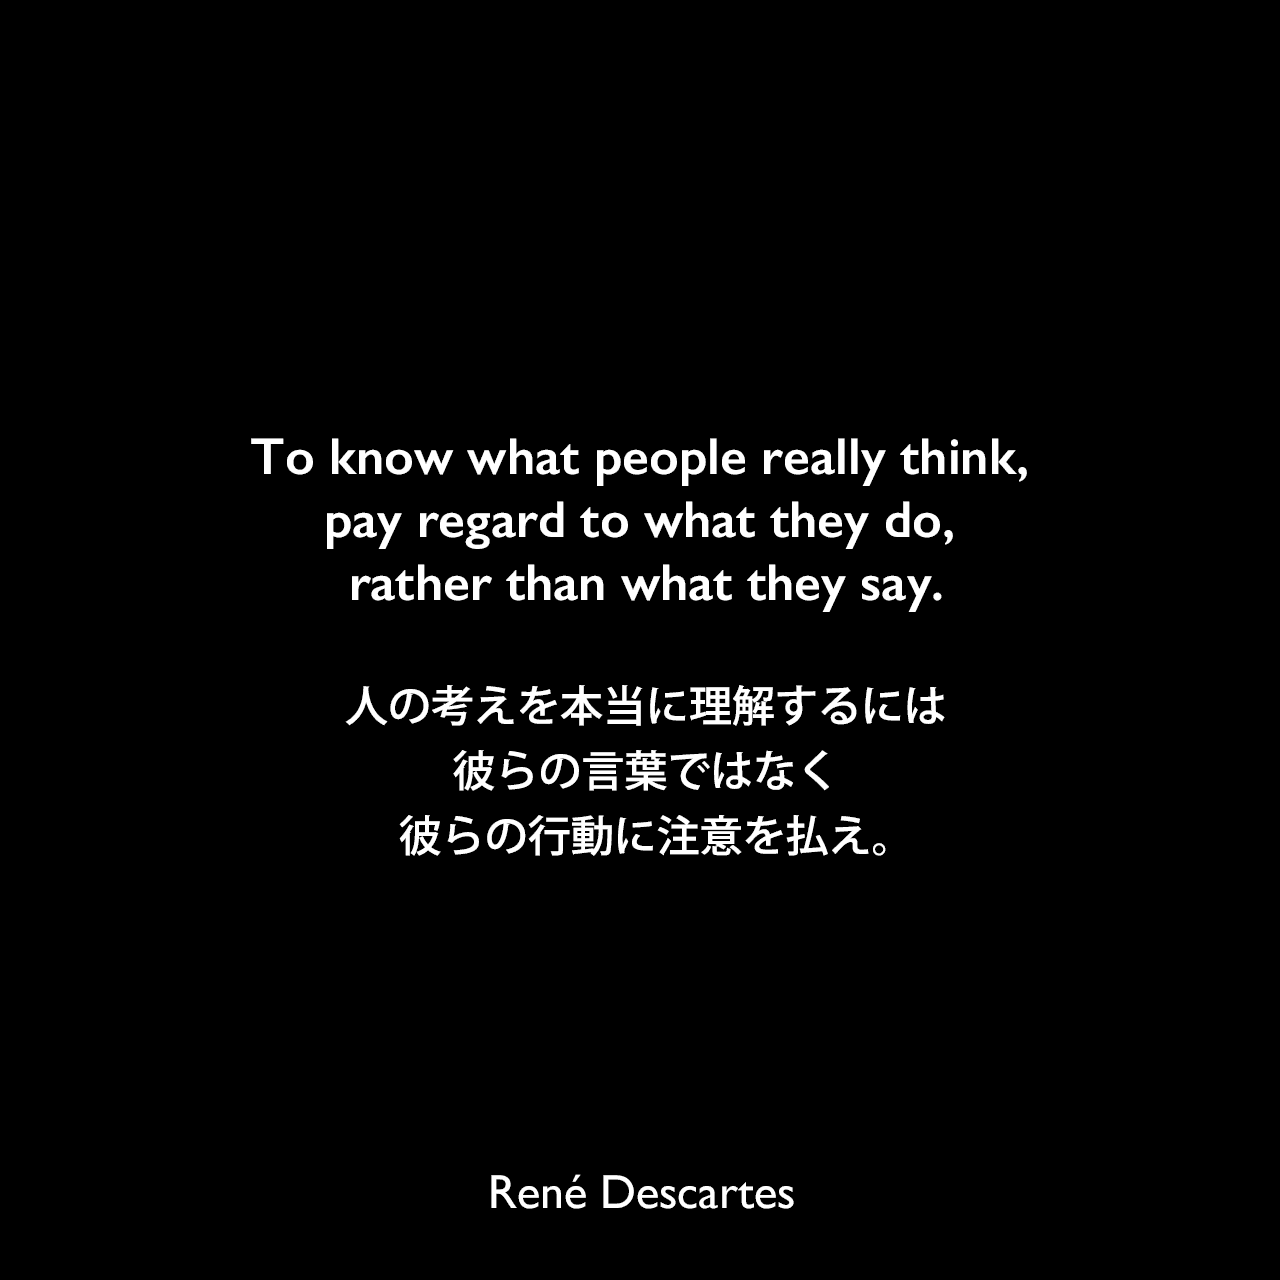 To know what people really think, pay regard to what they do, rather than what they say.人の考えを本当に理解するには、彼らの言葉ではなく、彼らの行動に注意を払え。René Descartes